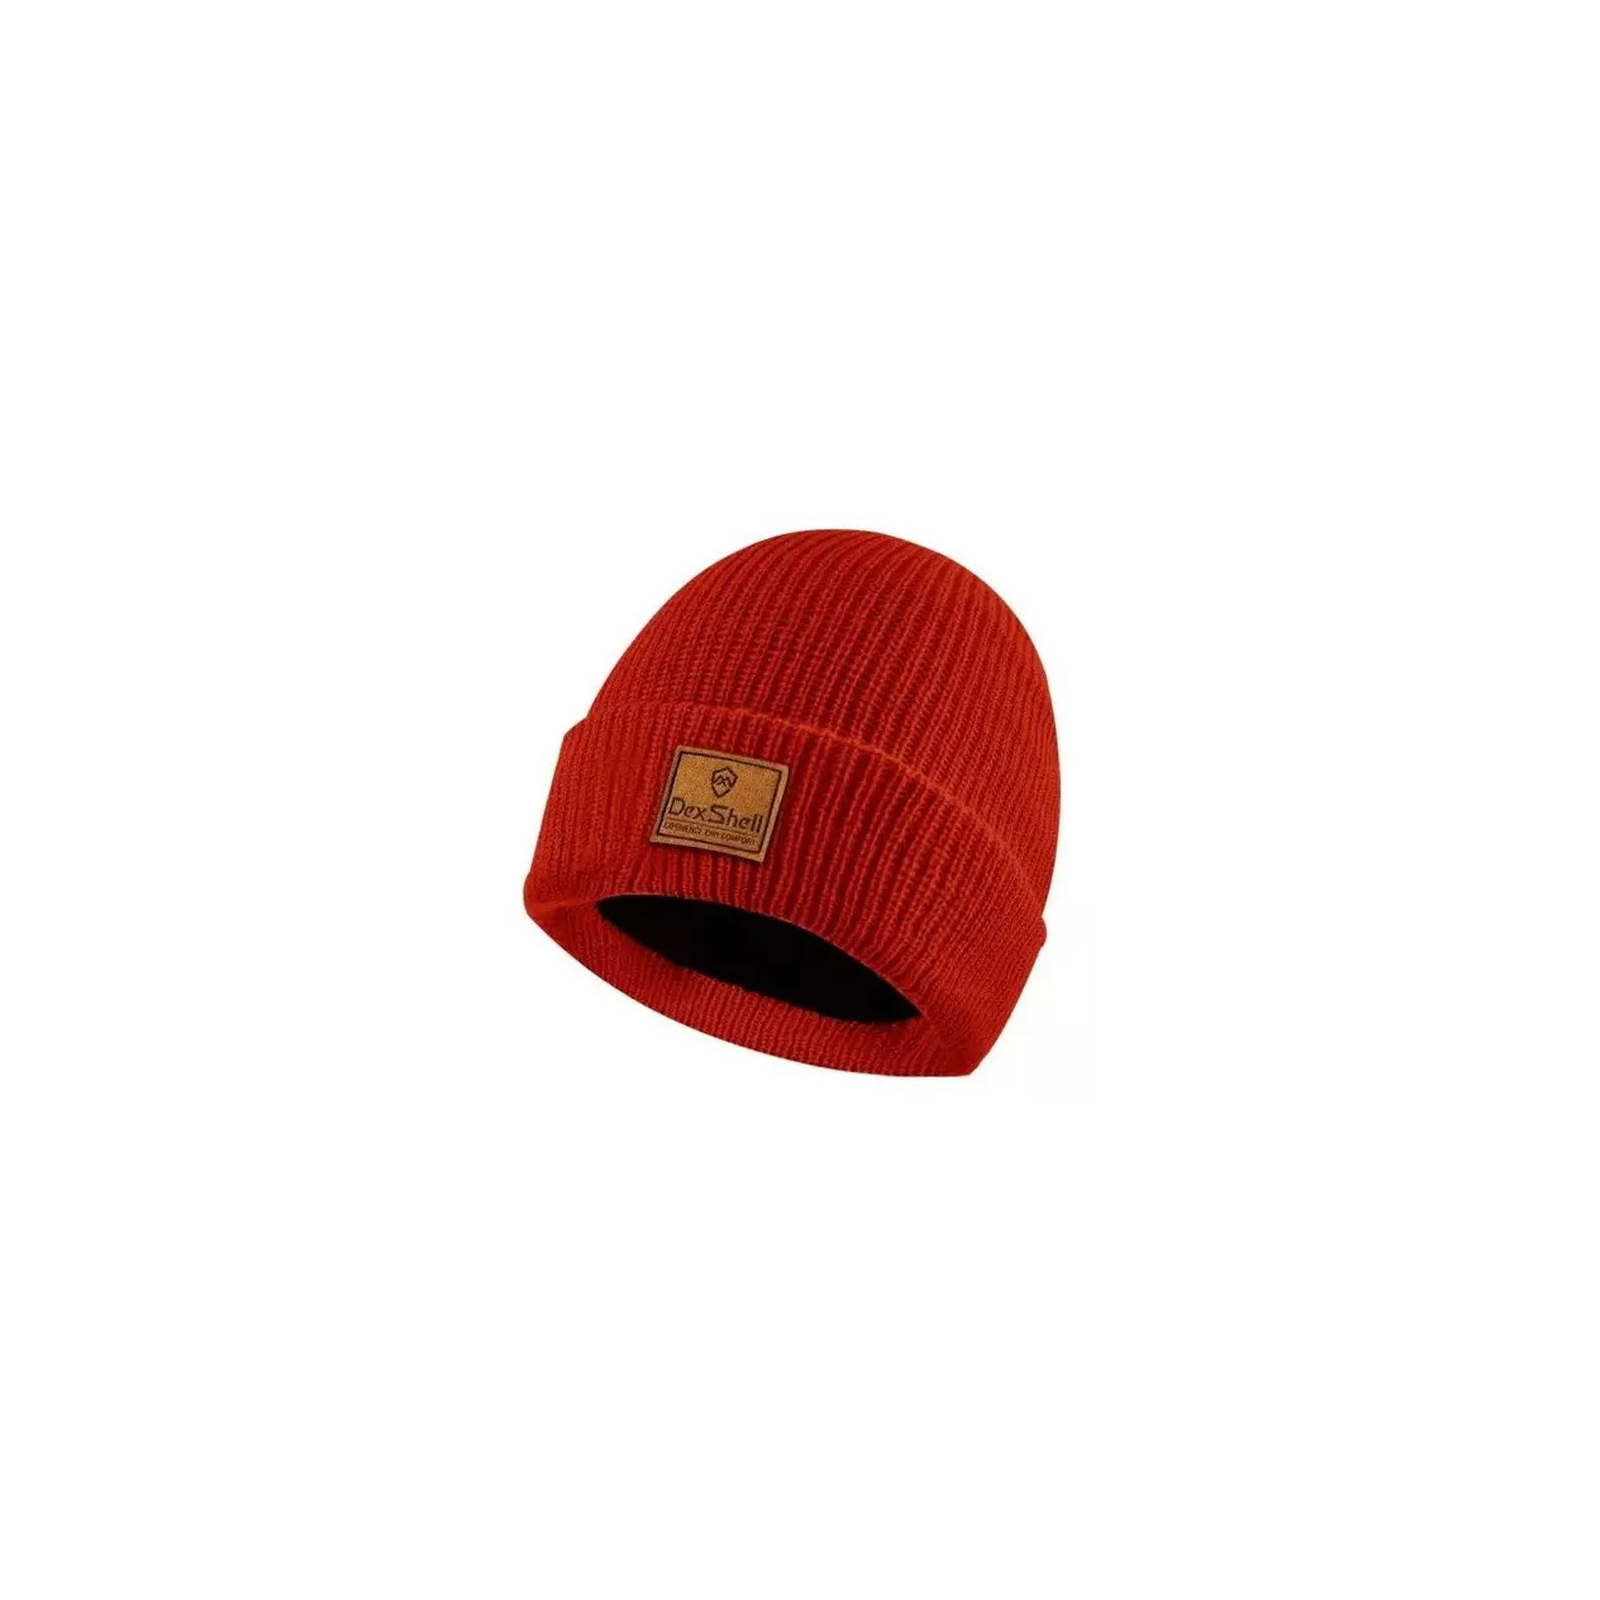 Водонепроникна шапка Dexshell Watch Beanie Red (DH322RED)